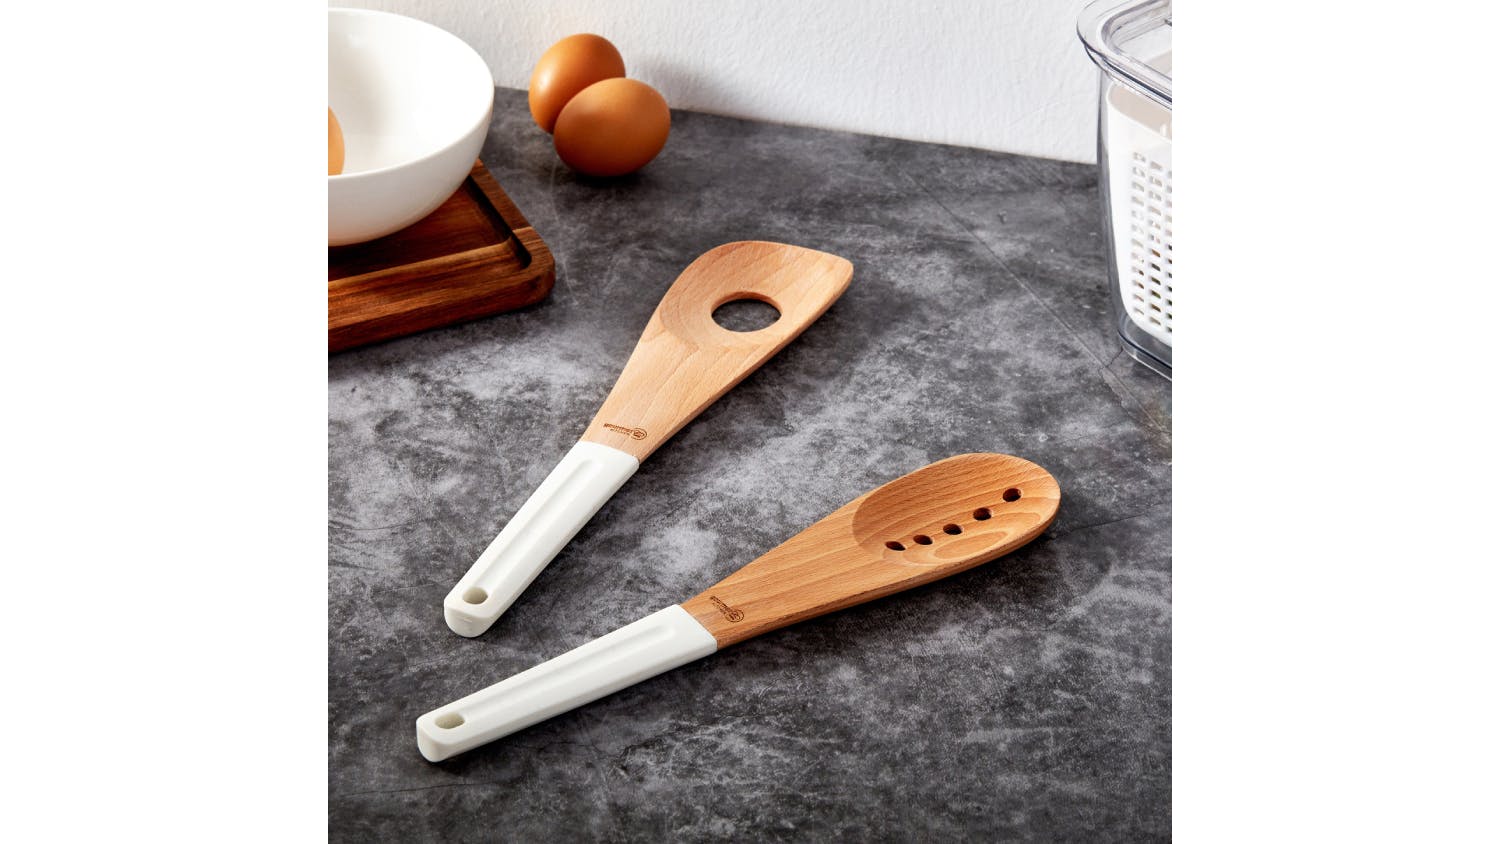 Gourmet Kitchen Wooden Spoon Set with Rubberised Handles 2pcs. - White